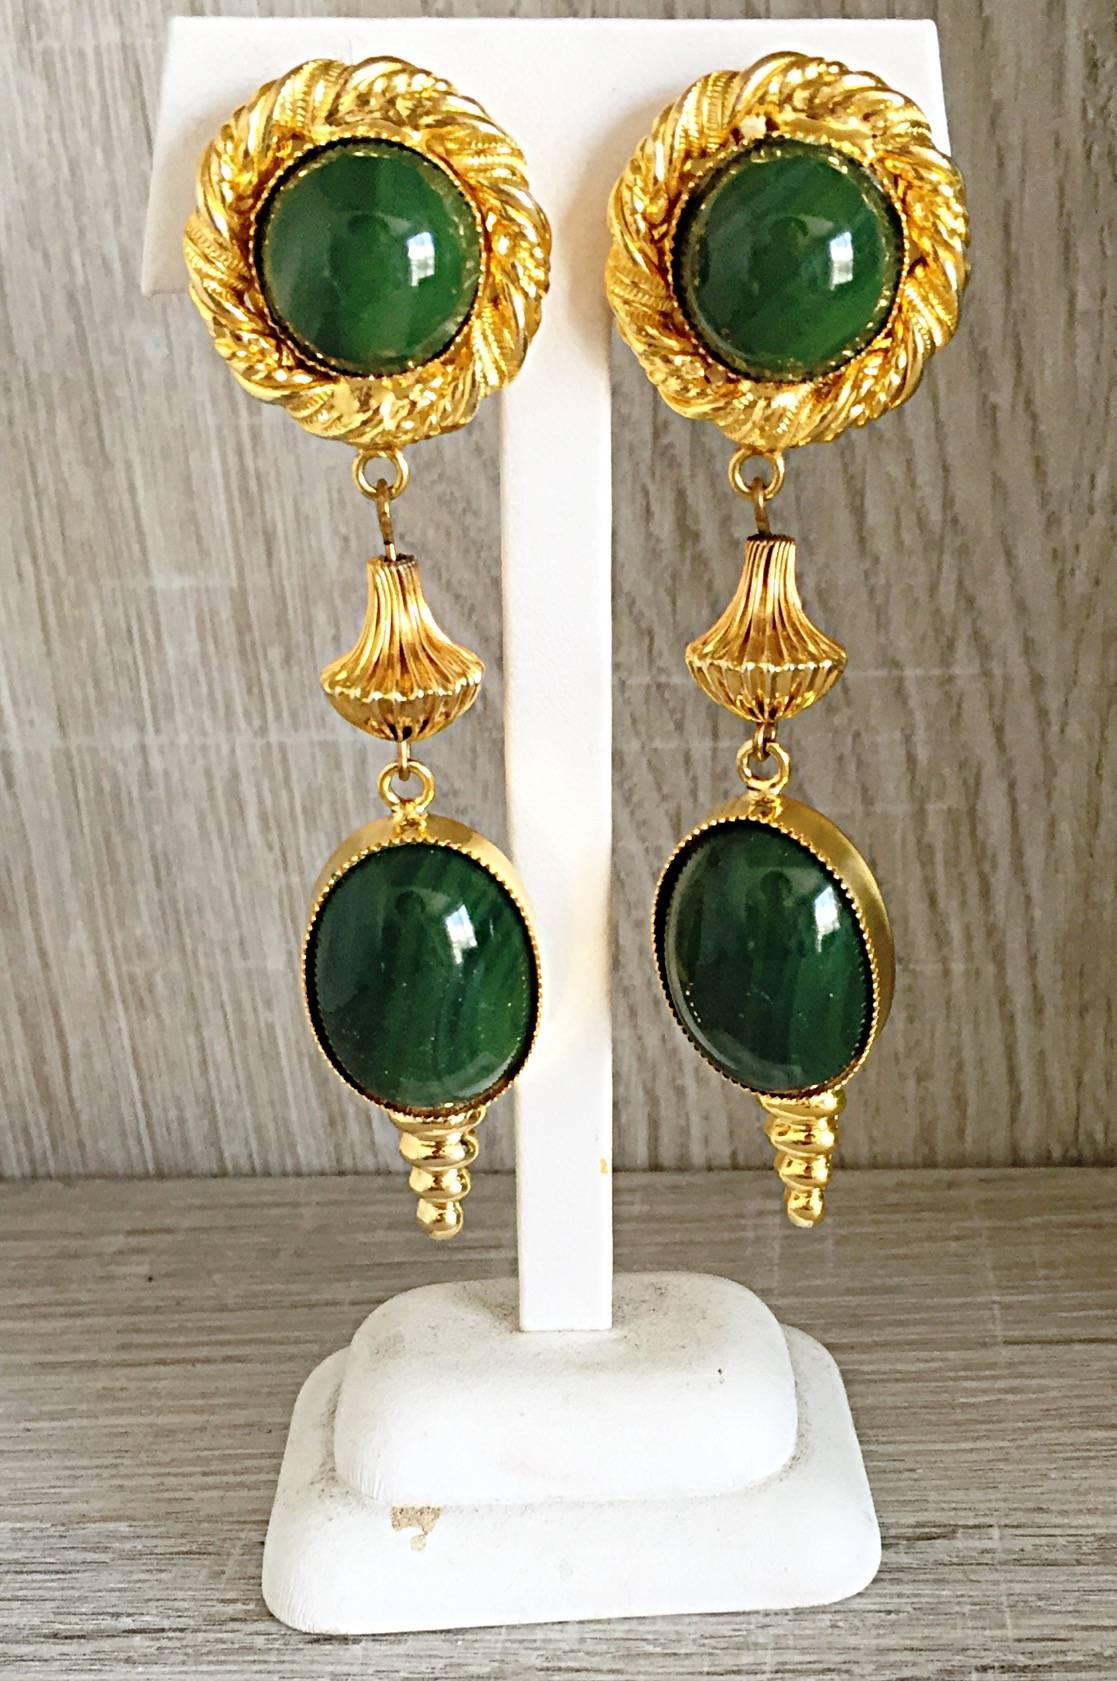 Exceptional 70s WILLIAM DE LILLO emerald green and gold chandelier earrings! Not too heavy, these beauties can easily be dressed up or down. Clip-on style that can easily be turned into pierced. Perfect with jeans or a dress. In great condition.